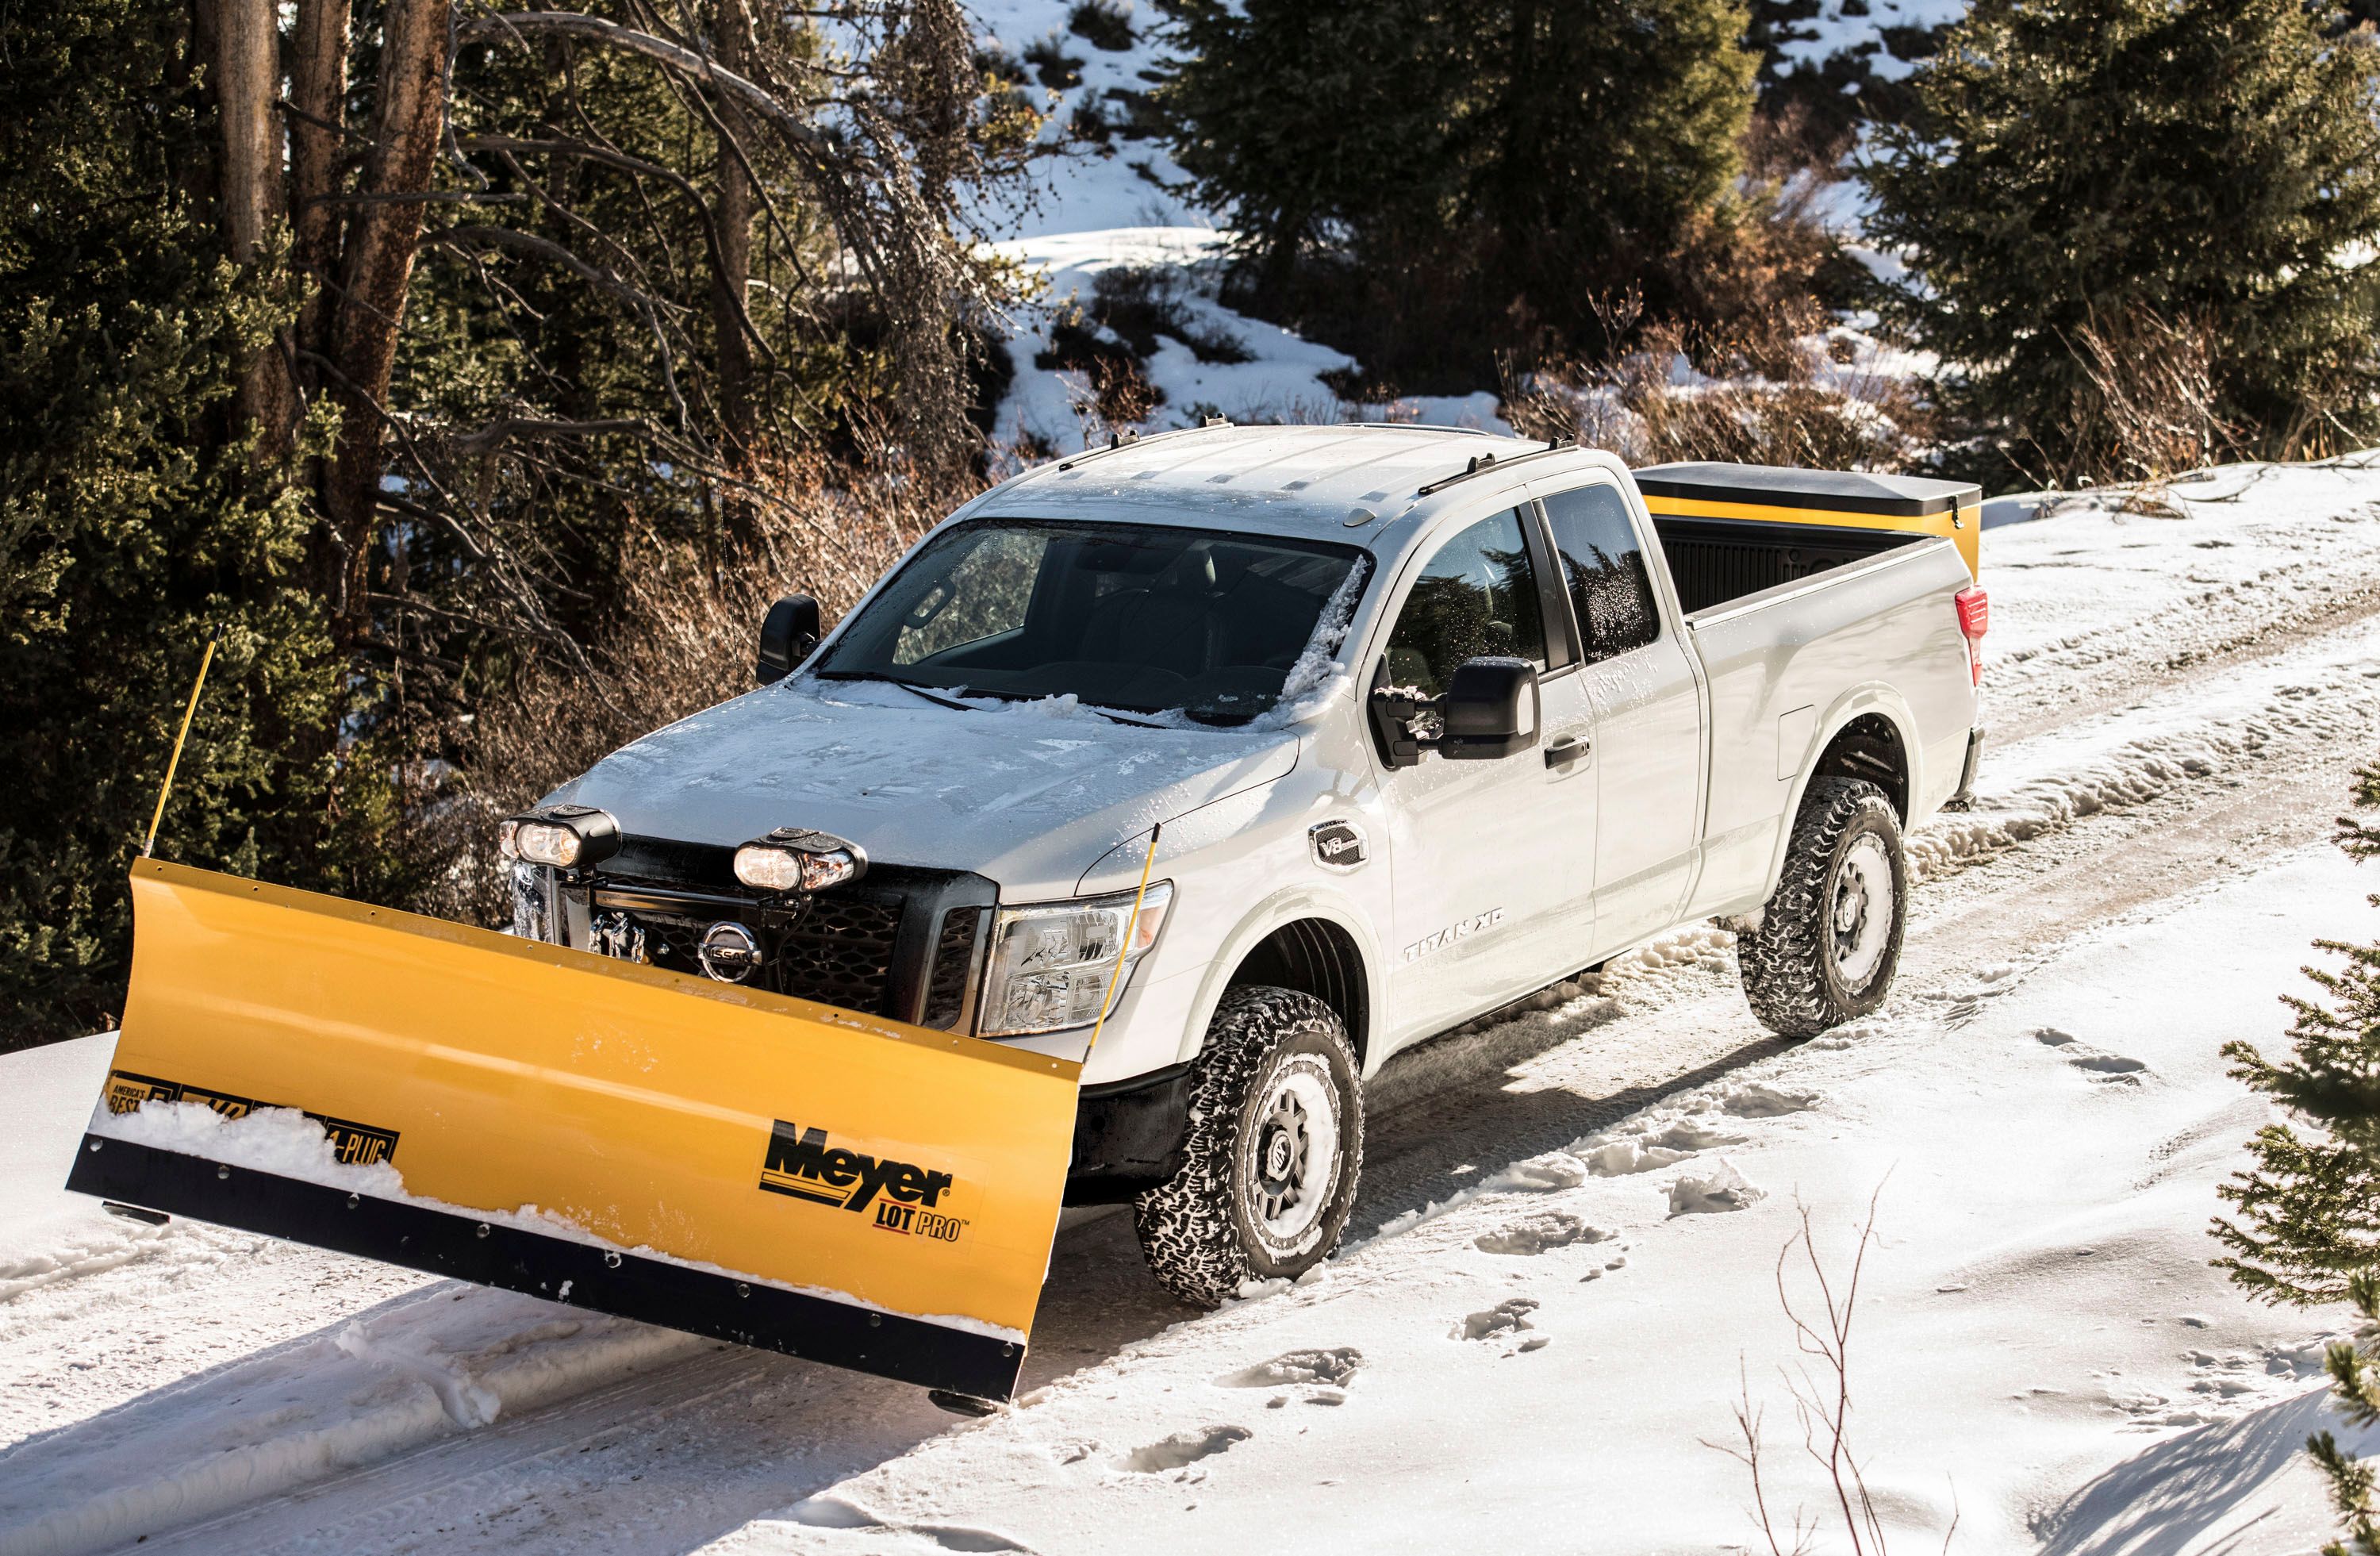 2017 Nissan Titan XD Snow Plow Package Is Ready for a White Christmas